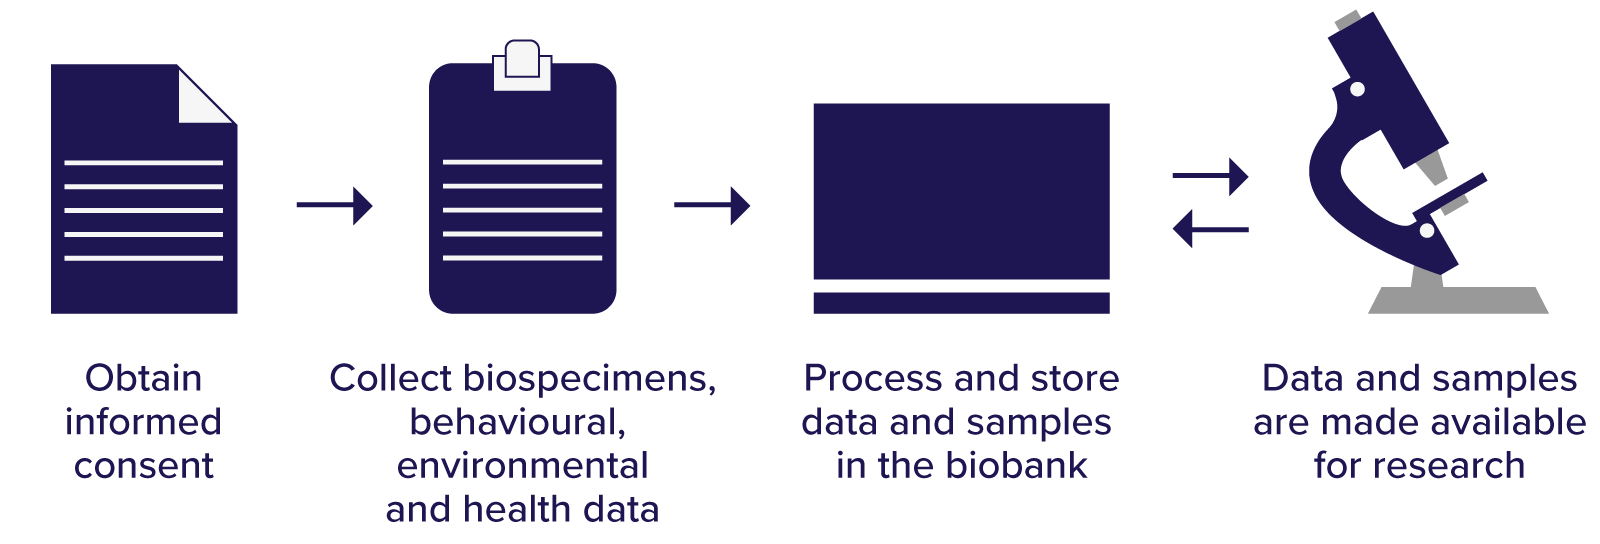 Infographic showing a flow of improving data and samples. First, obtain informed consent. Second, collect biospecimens, behavioural, environmental and health data. Third, process and store data and samples in the Biobank. Fourth, data and samples are made available for research. There's a back and forth arrow between the third and fourth step, showing how the data is improved with use.